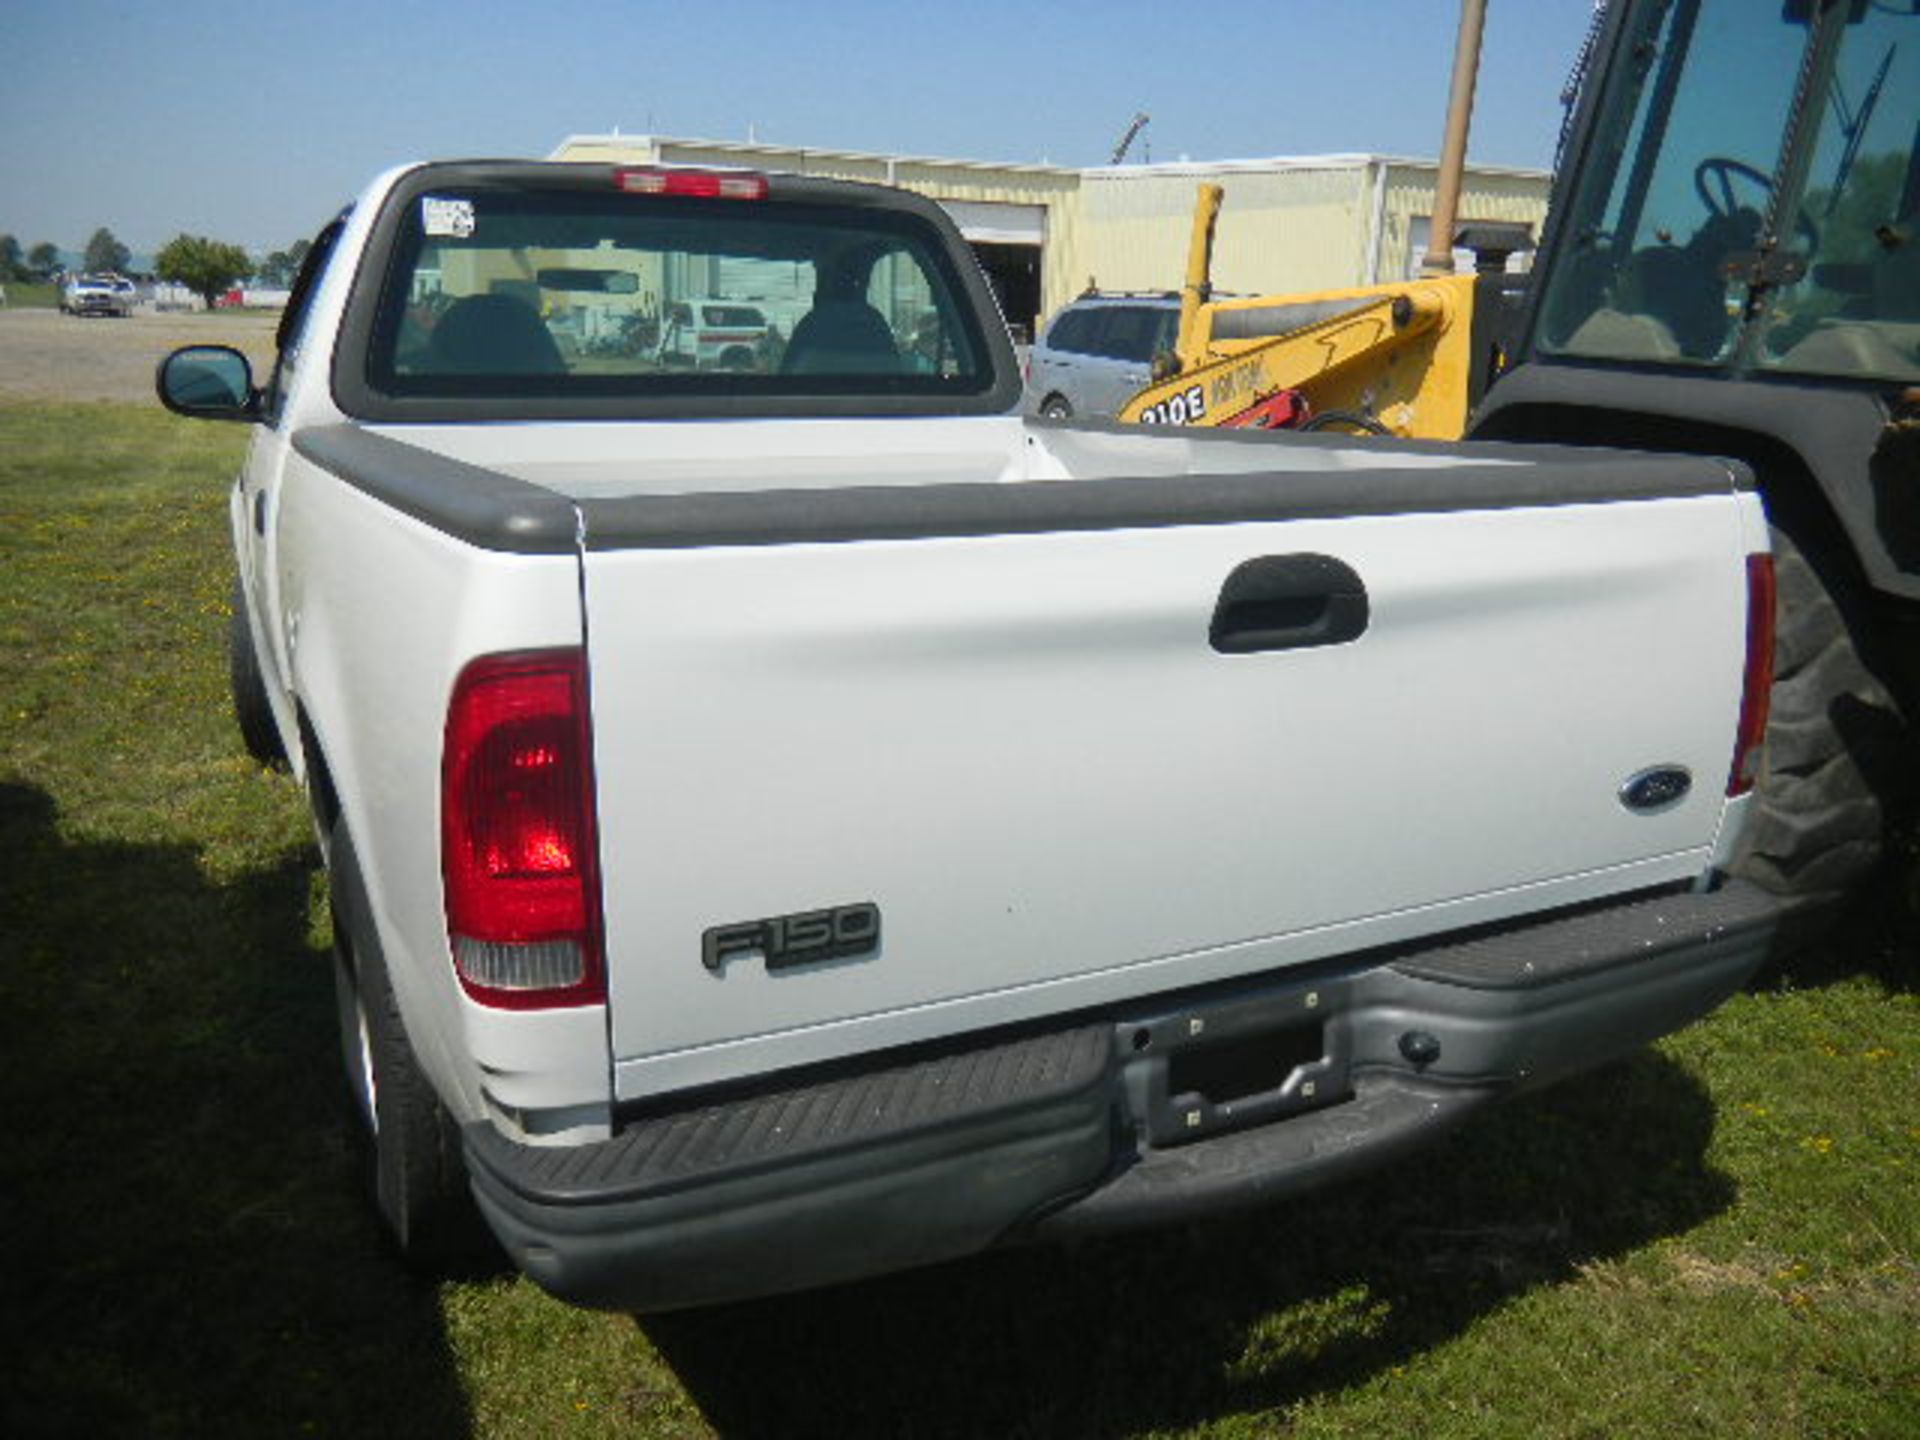 Ford F-150 XL White Pickup Truck - Asset I.D. #178 - Last of Vin (CA81703) - Image 3 of 6